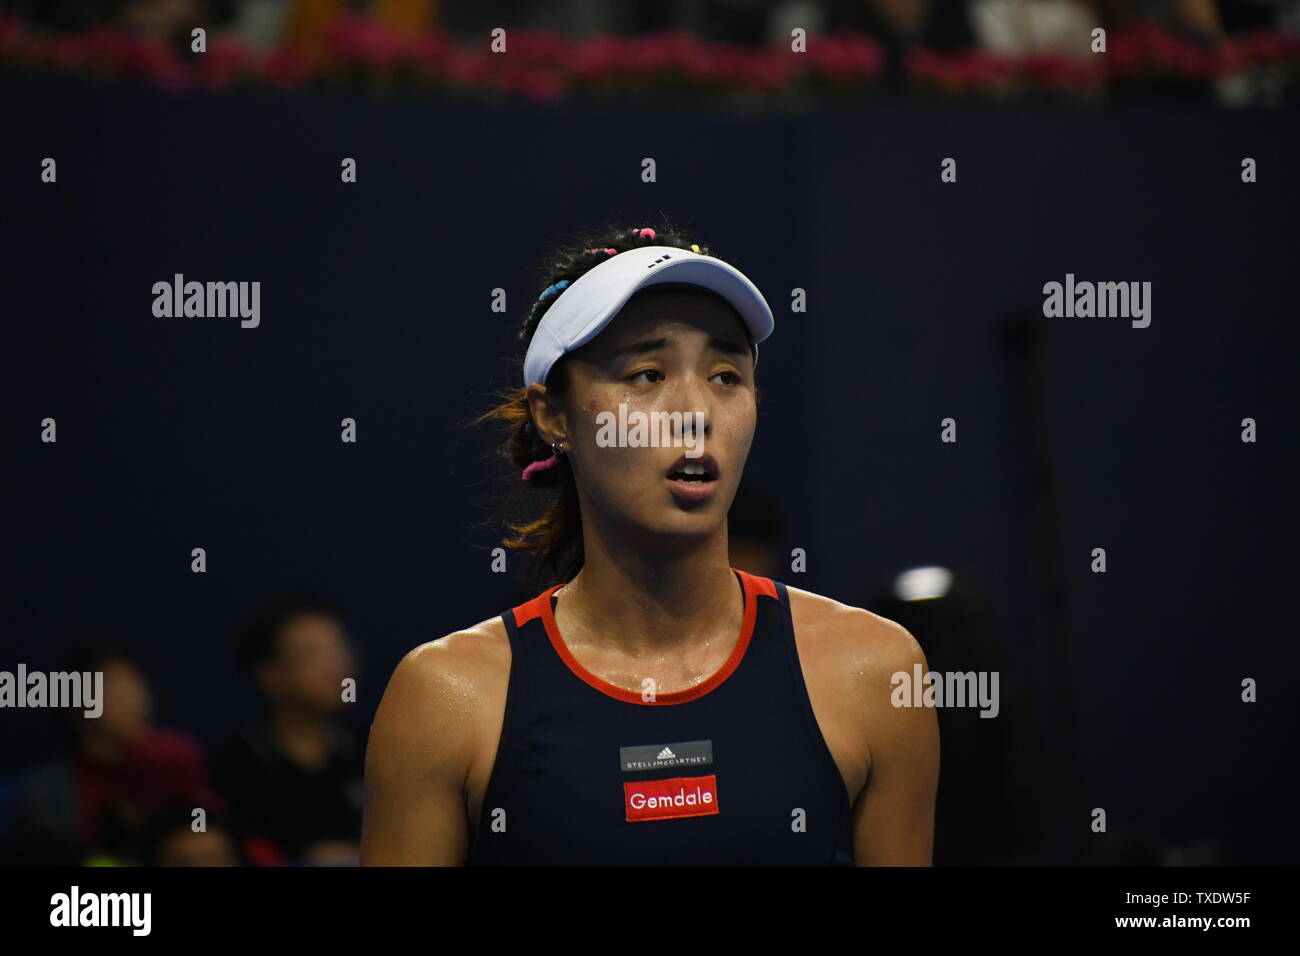 2018 Zhuhai Super Classic Wang Qiang lost to runner-up against Barty, the moment of the game and the awards ceremony Stock Photo